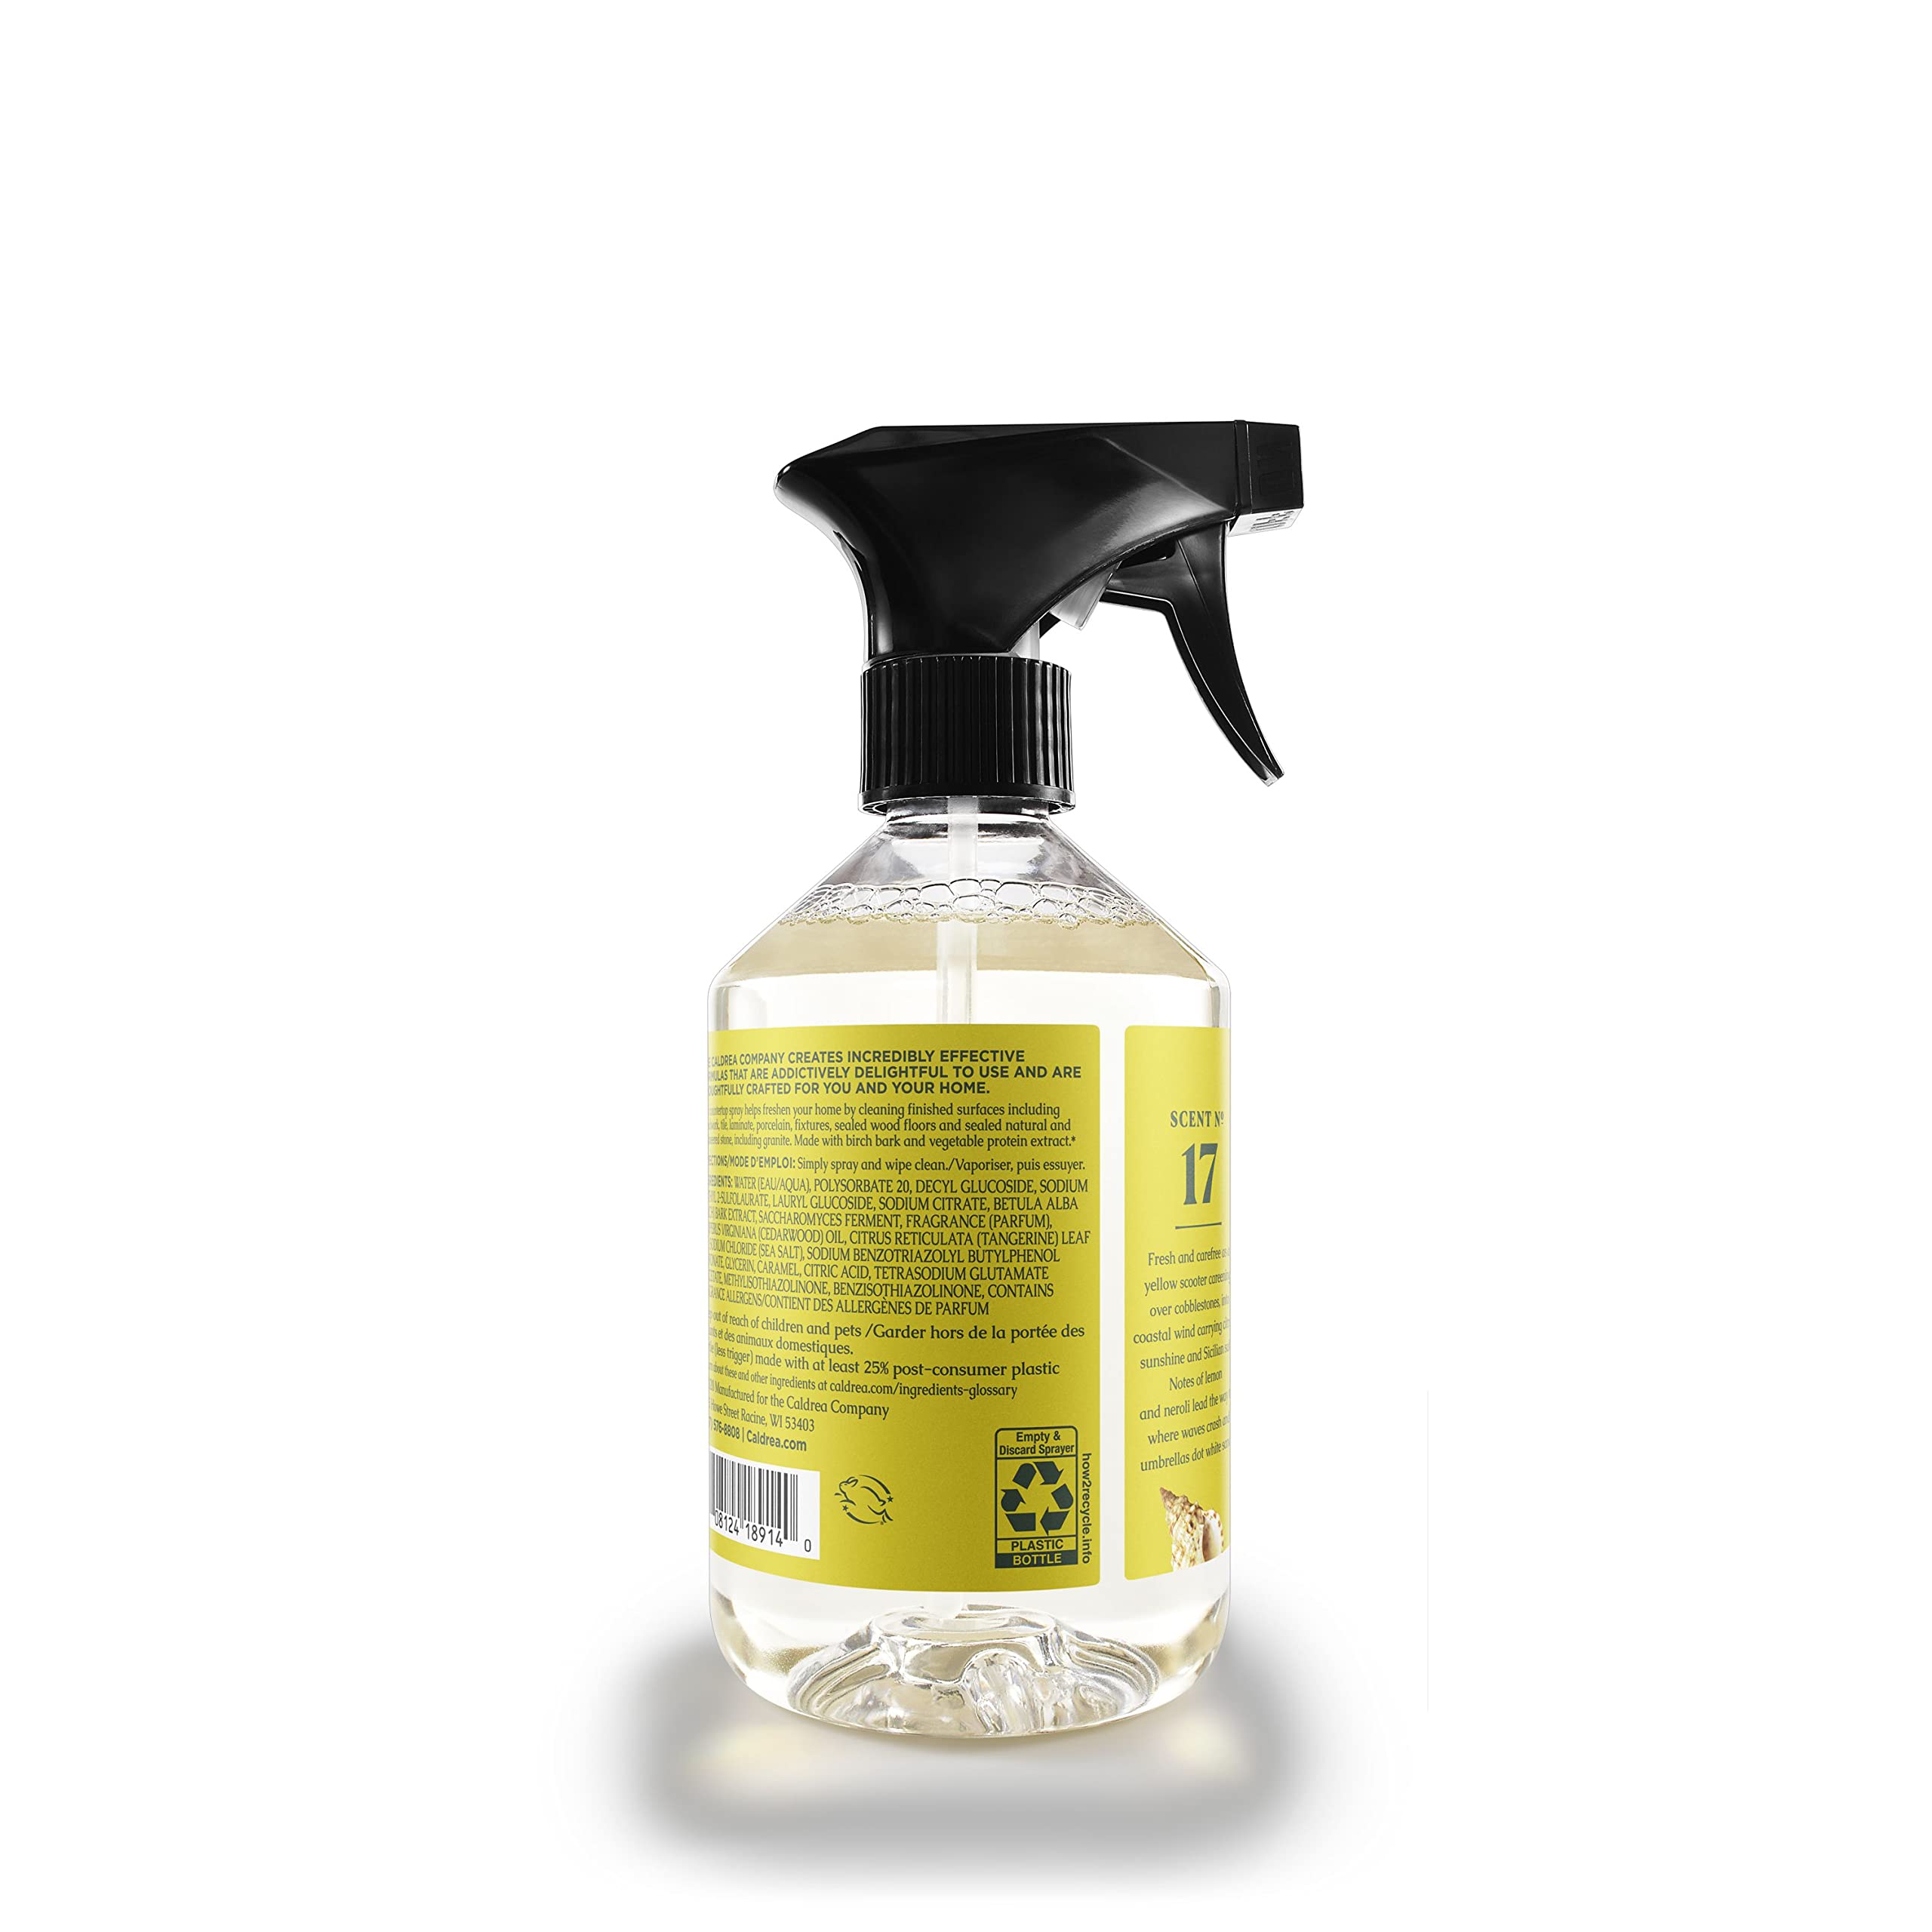 Caldrea Multi-surface Countertop Spray Cleaner, Made with Vegetable Protein Extract, Sea Salt Neroli Scent, 16 oz